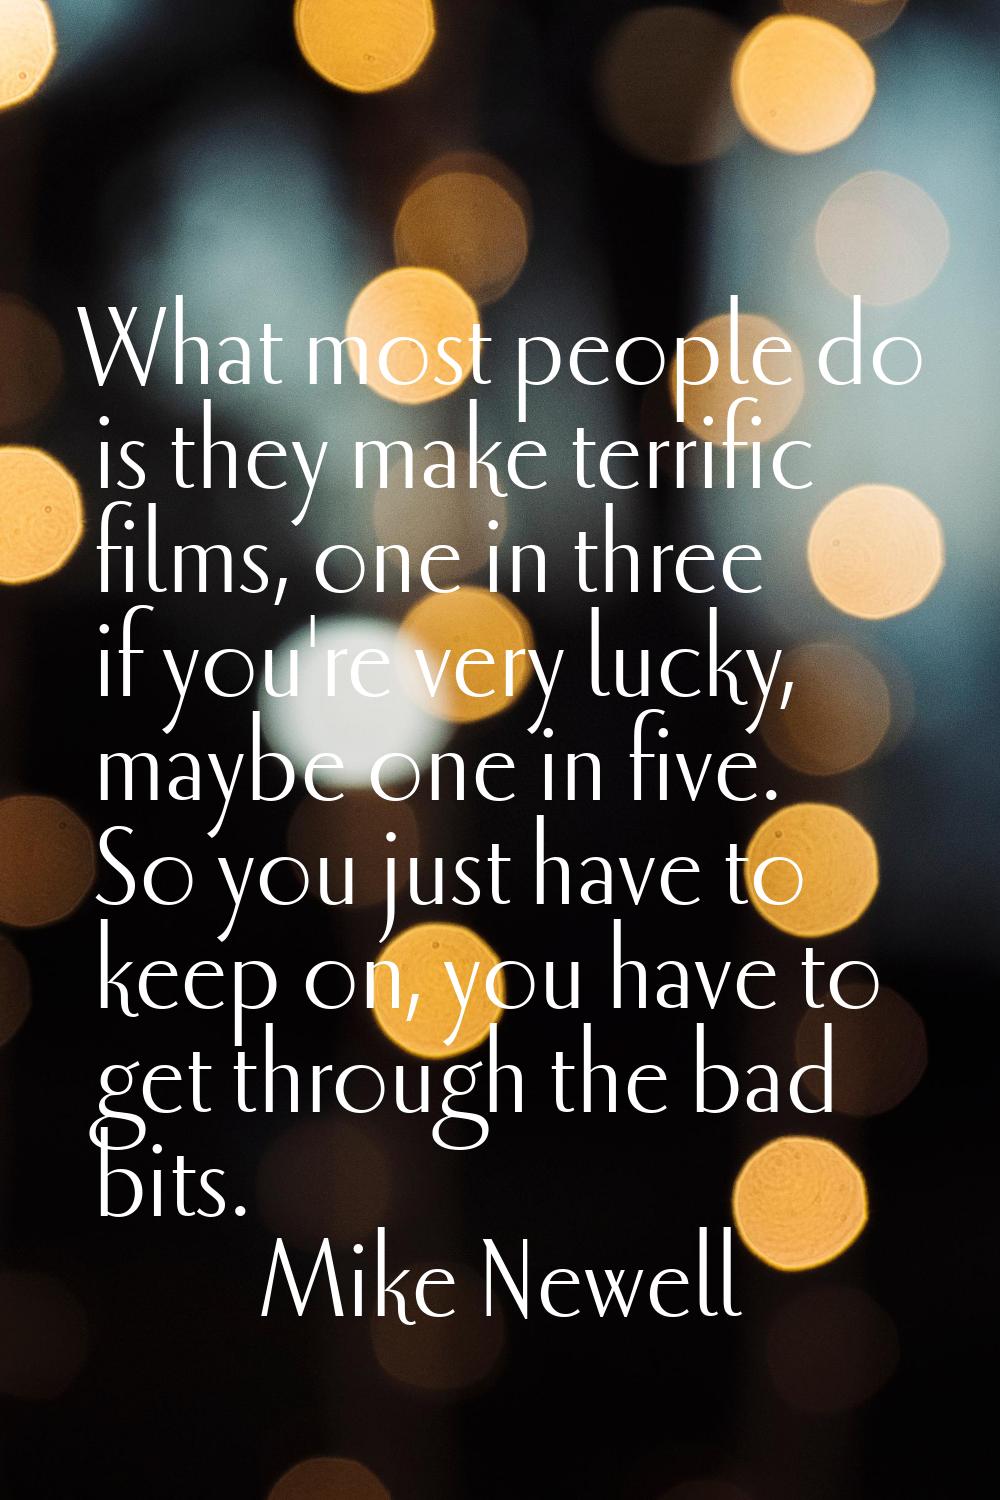 What most people do is they make terrific films, one in three if you're very lucky, maybe one in fi